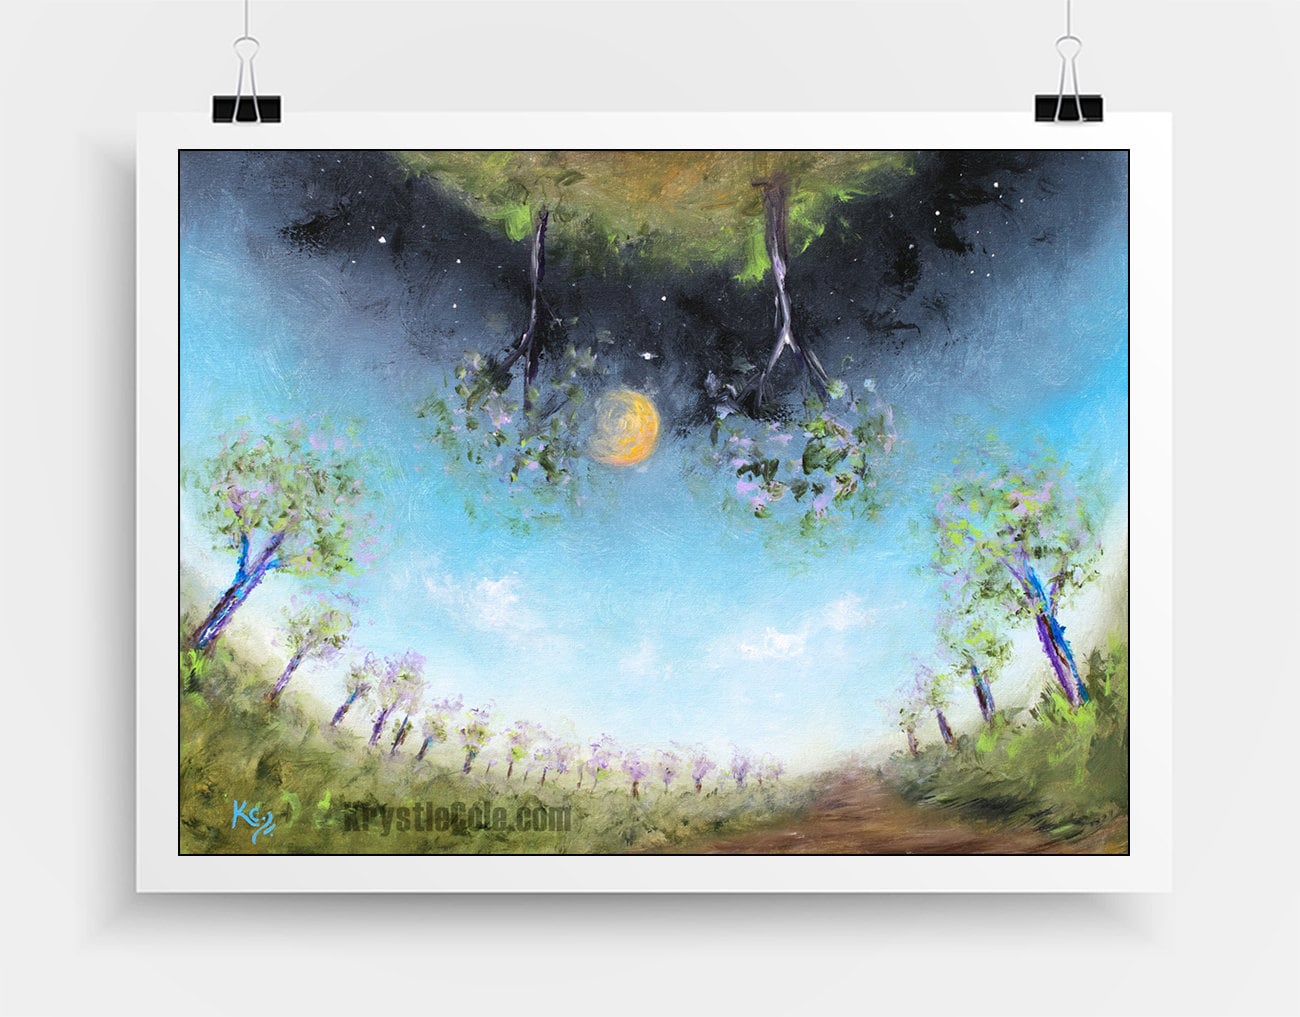 Boho Wall Decor - Surreal Visionary Art Print, Abstract Landscape w/ Night Sky, Space, Trees. "On the Path" by Krystle Cole